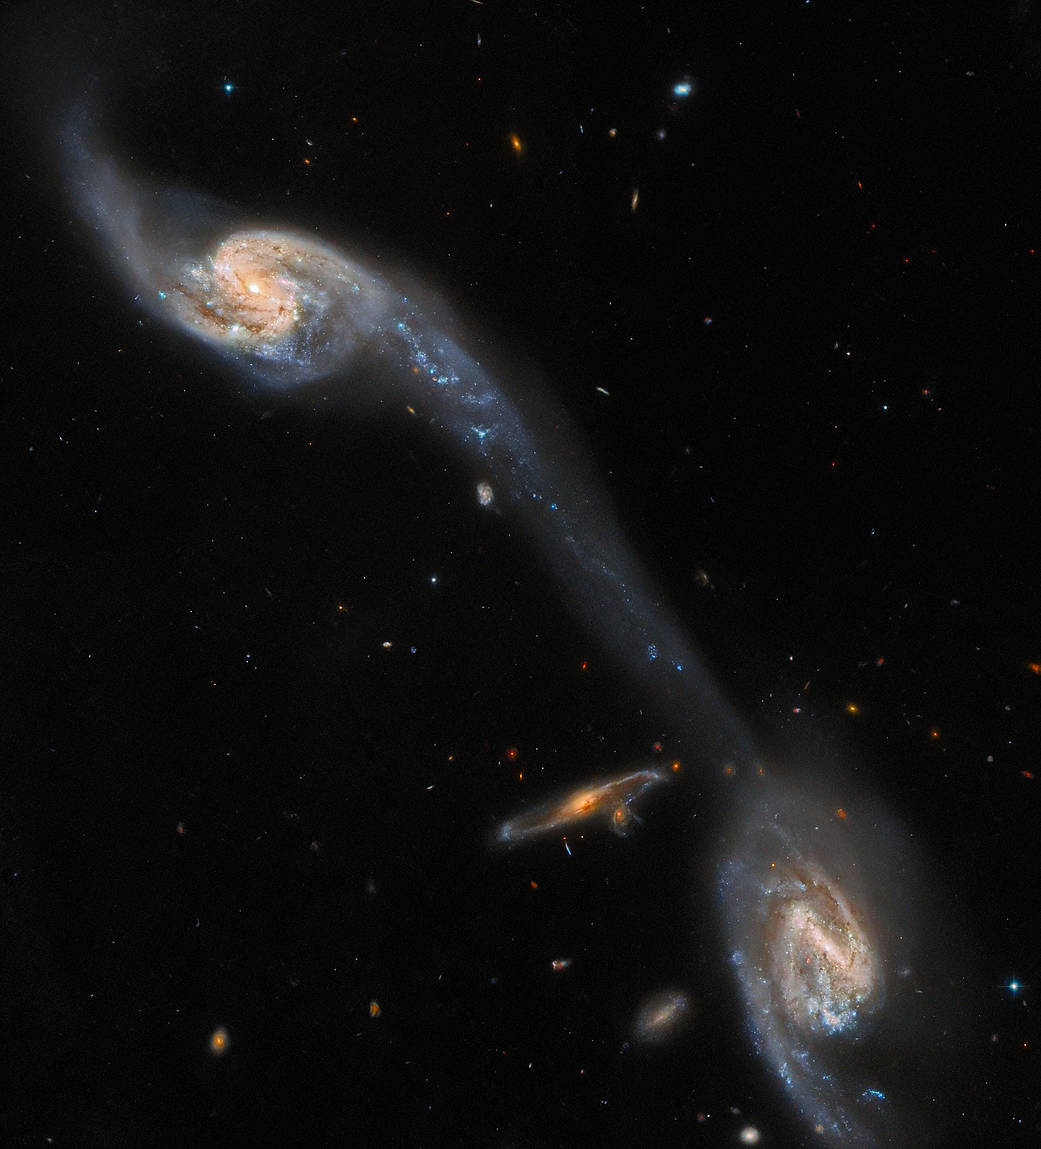 Two spiral galaxies are viewed almost face-on; they are a mix of pale blue and yellow in colour, crossed by strands of dark red dust. They lie in the upper-left and lower-right corners. A long, faint streak of pale blue joins them, extending from an arm of one galaxy and crossing the field diagonally. A small spiral galaxy, orange in colour, is visible edge-on, left of the lower galaxy.